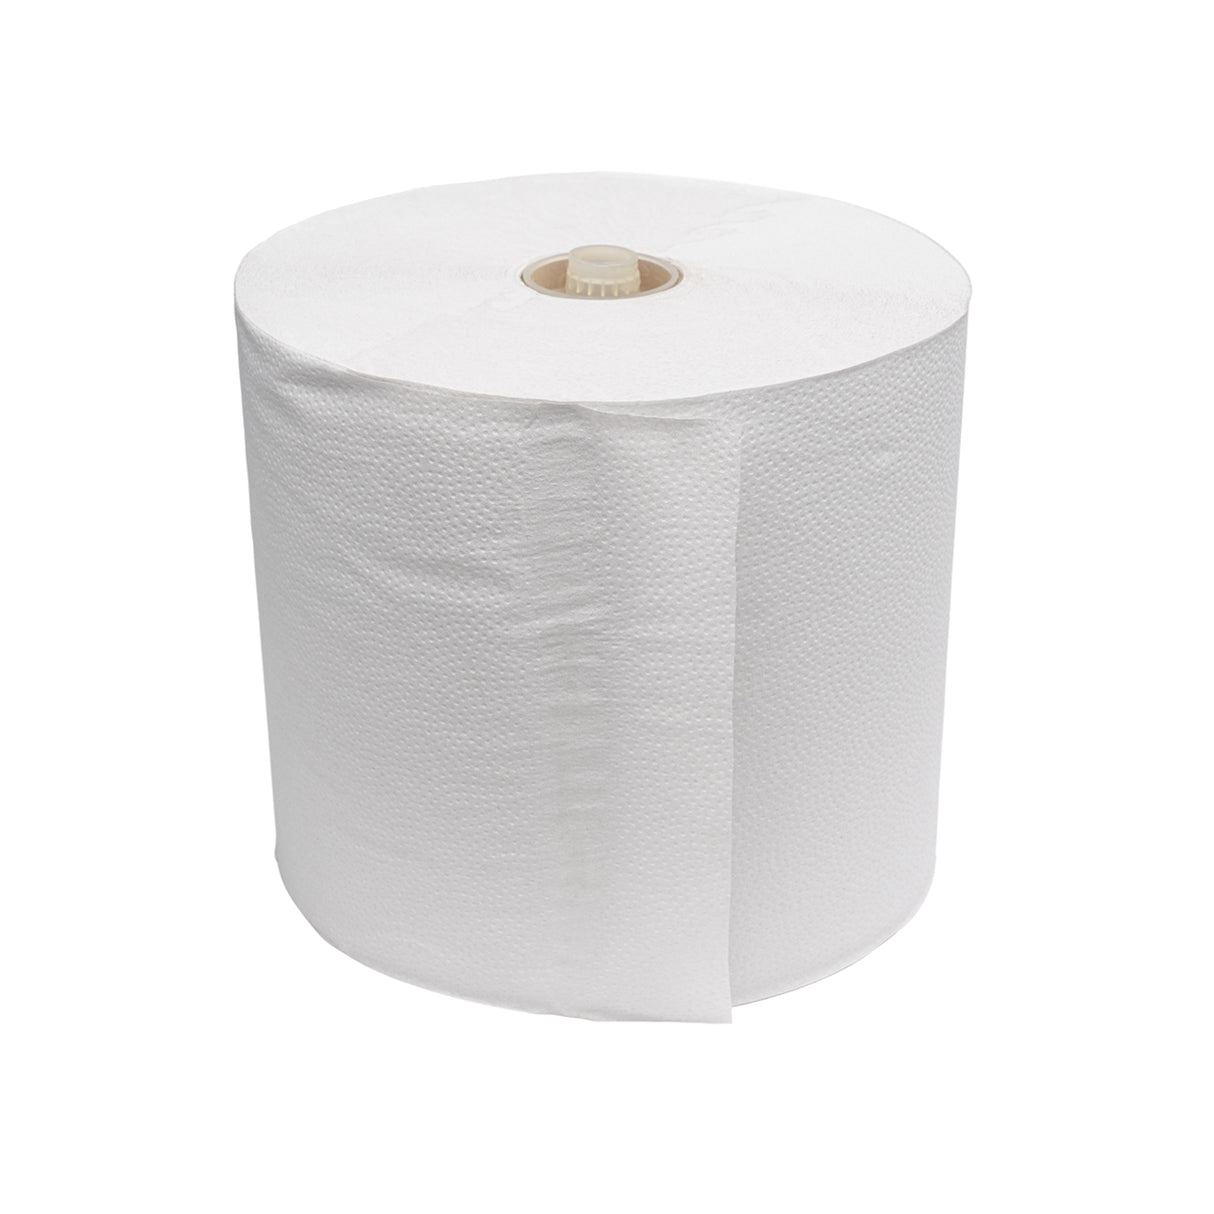 FIG WHITE AUTOCUT SUGARCANE ROLL TOWEL 1 PLY